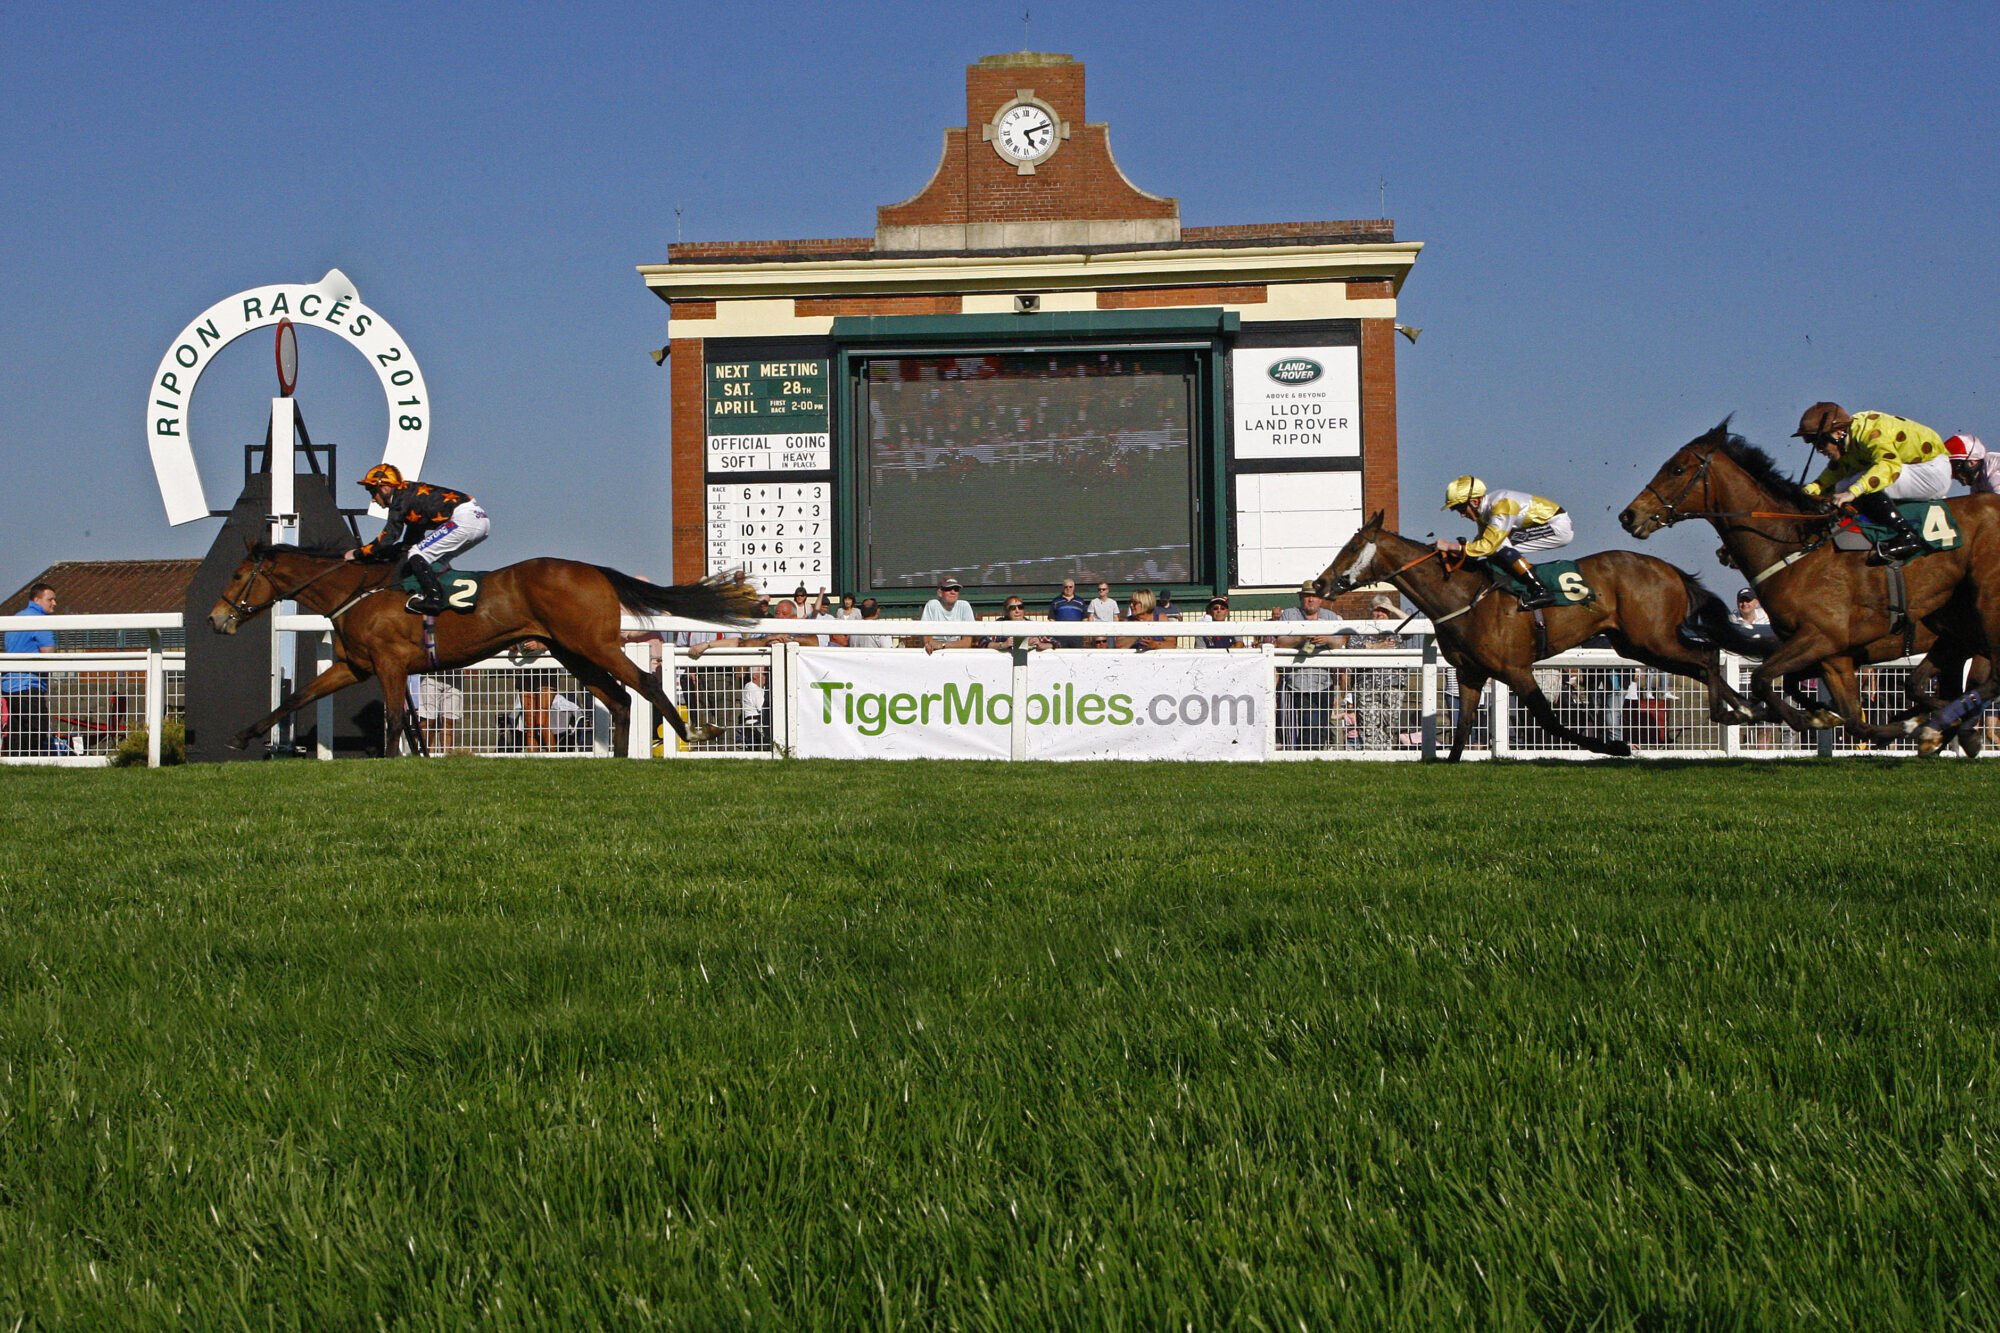 Image name go racing yorkshire horses on course ripon racecourse 2018 the 23 image from the post Ripon Flat Race at Ripon Racecourse on Saturday, August 19, 2023 in Yorkshire.com.